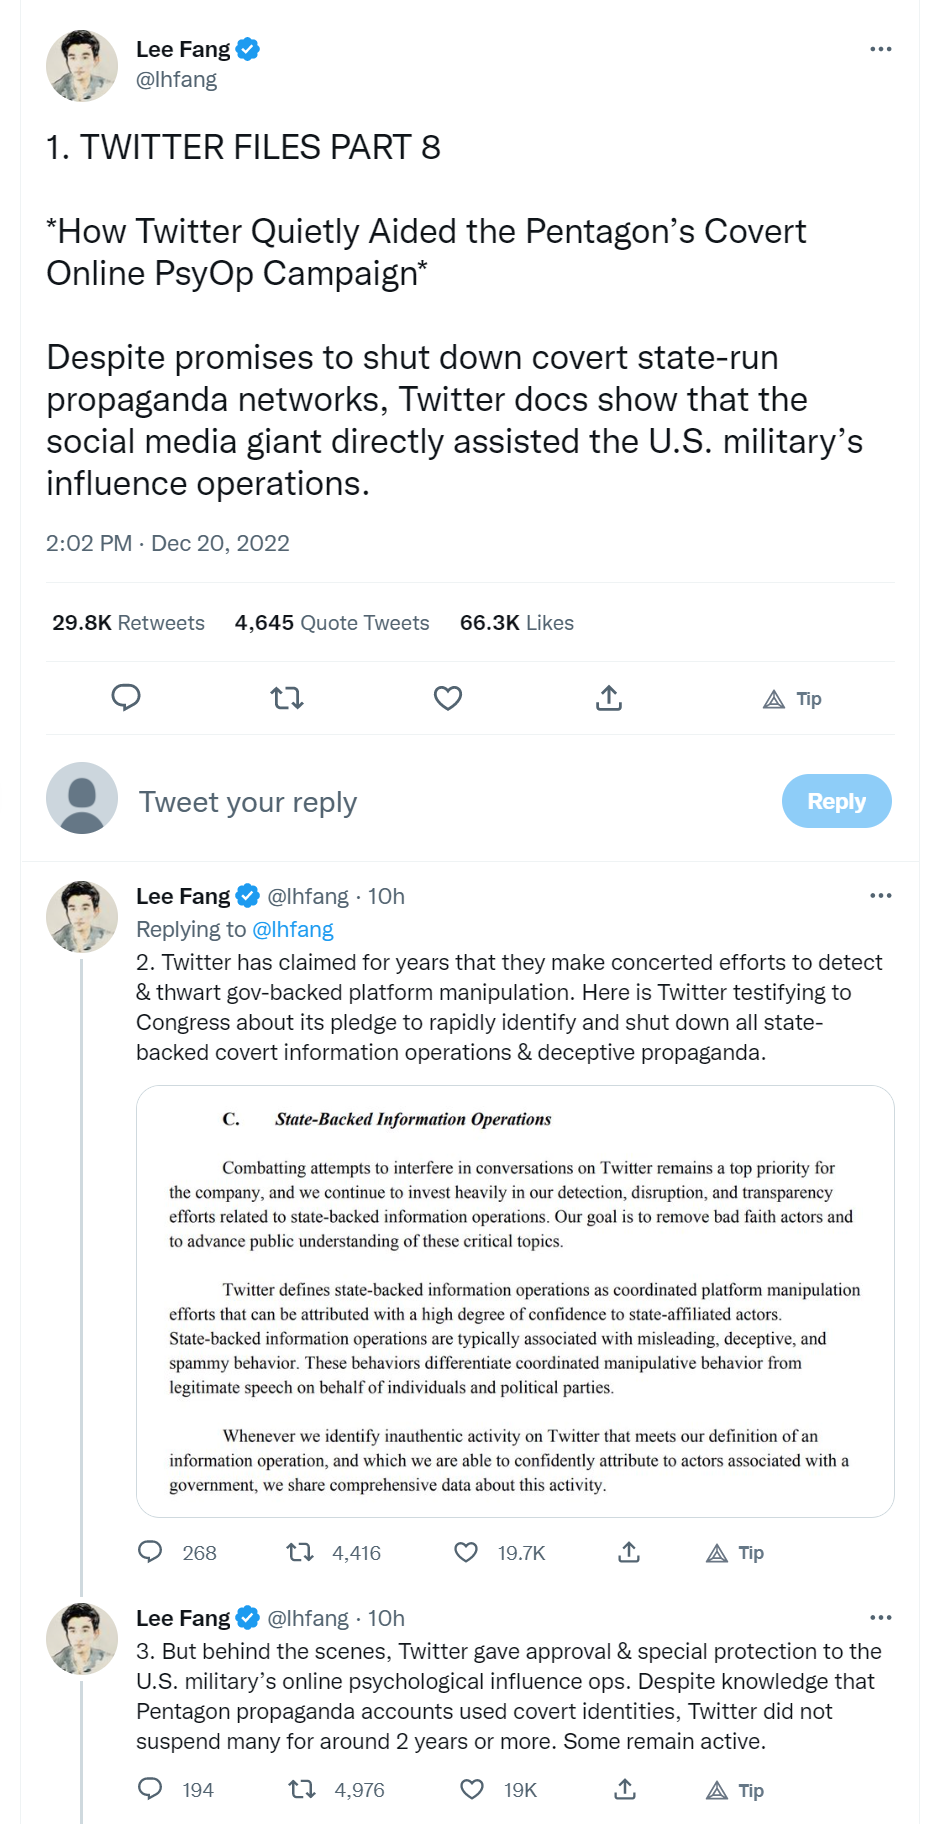 TWITTER FILES Pt. 8 - How Twitter Quietly Aided the Pentagon’s Covert Online PsyOp Campaign